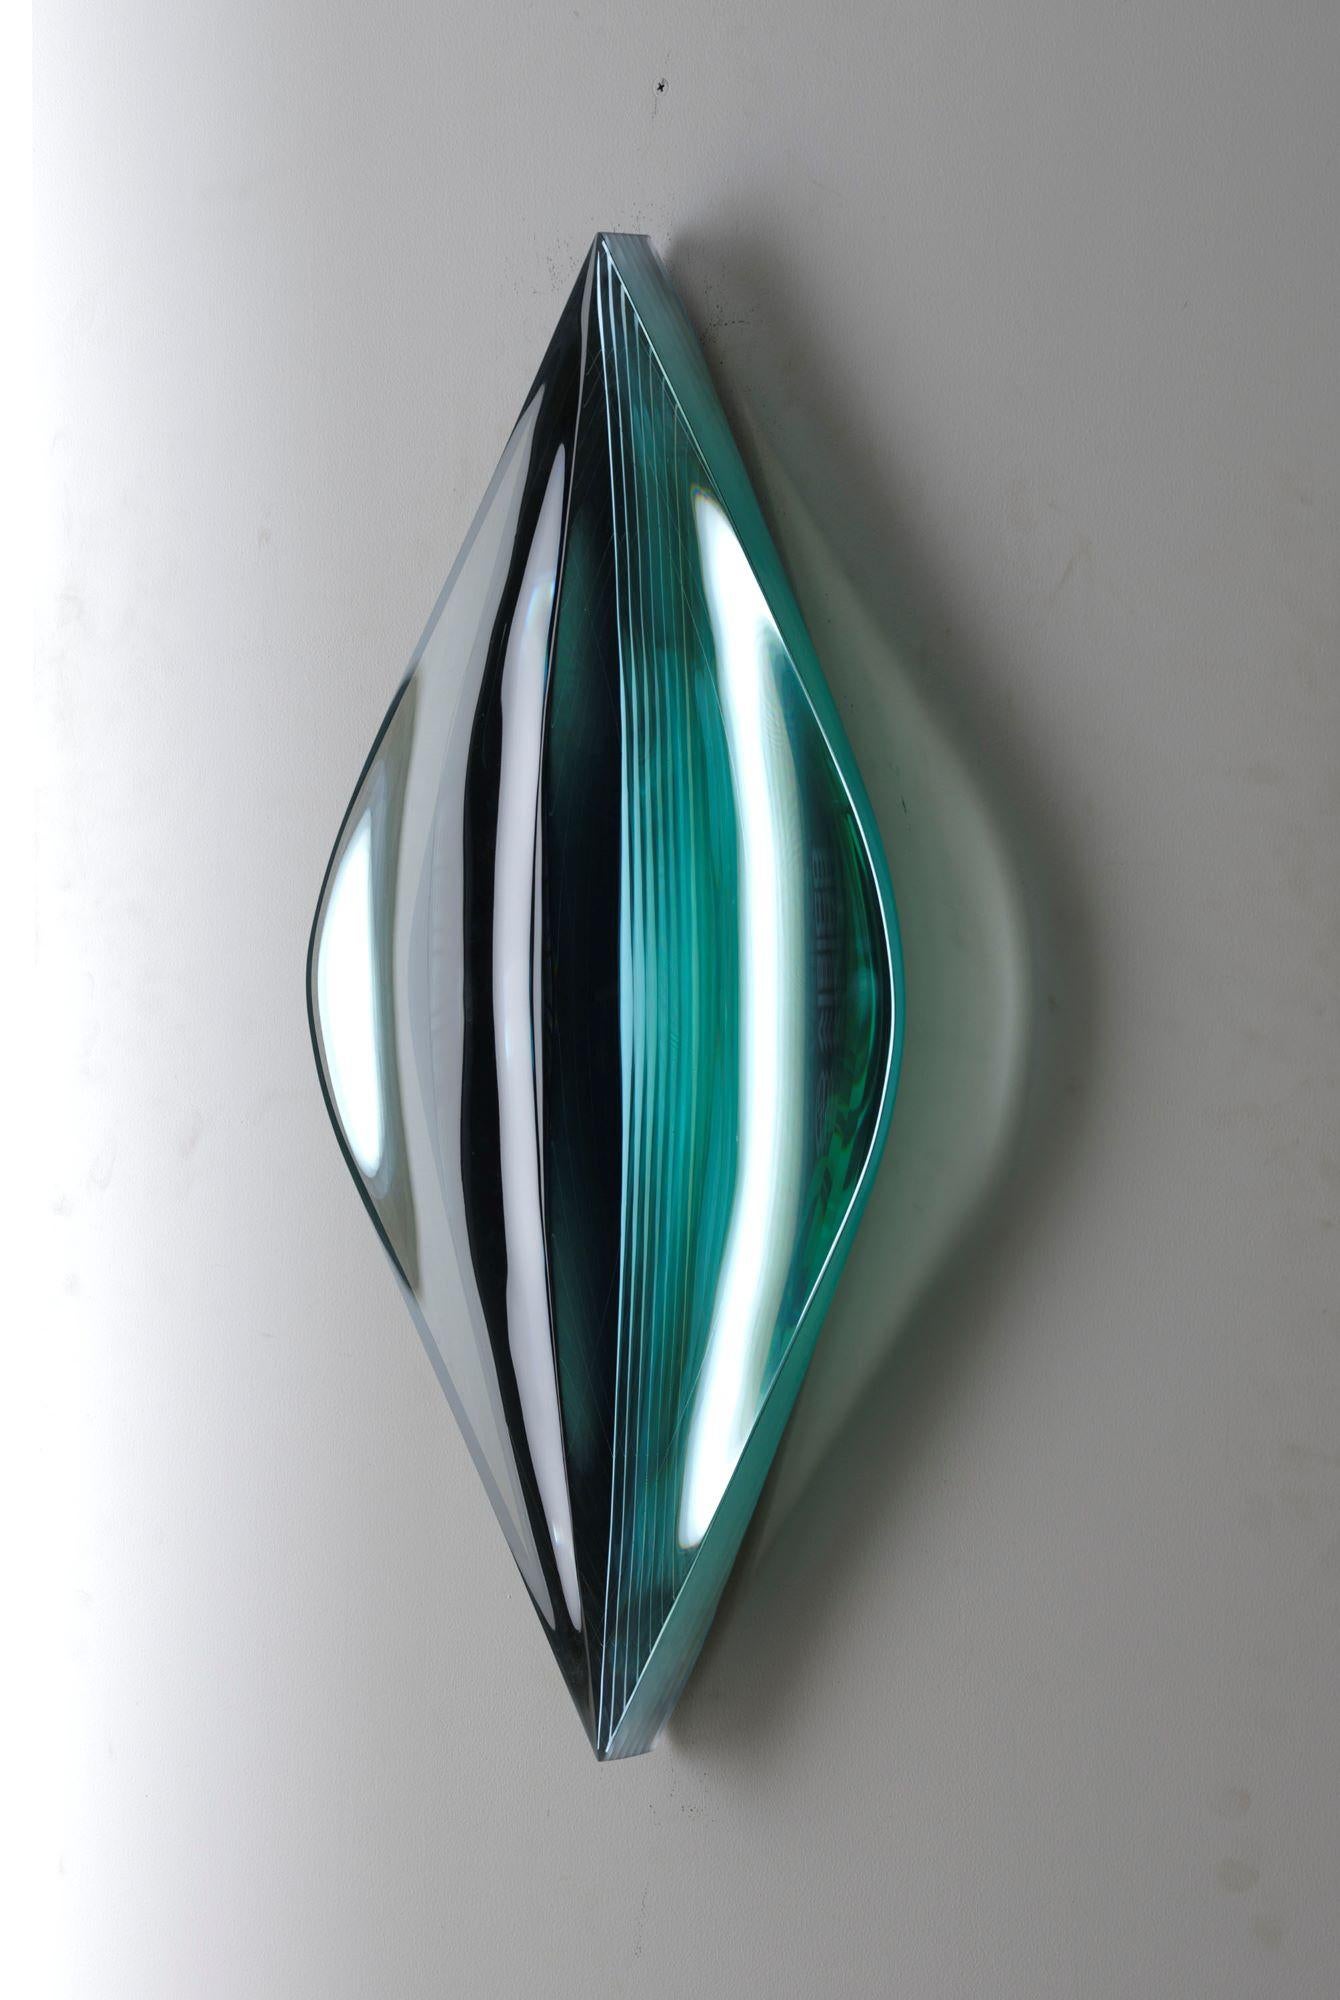 P.010502-II by Toshio Iezumi - Contemporary glass sculpture, green, abstract For Sale 4